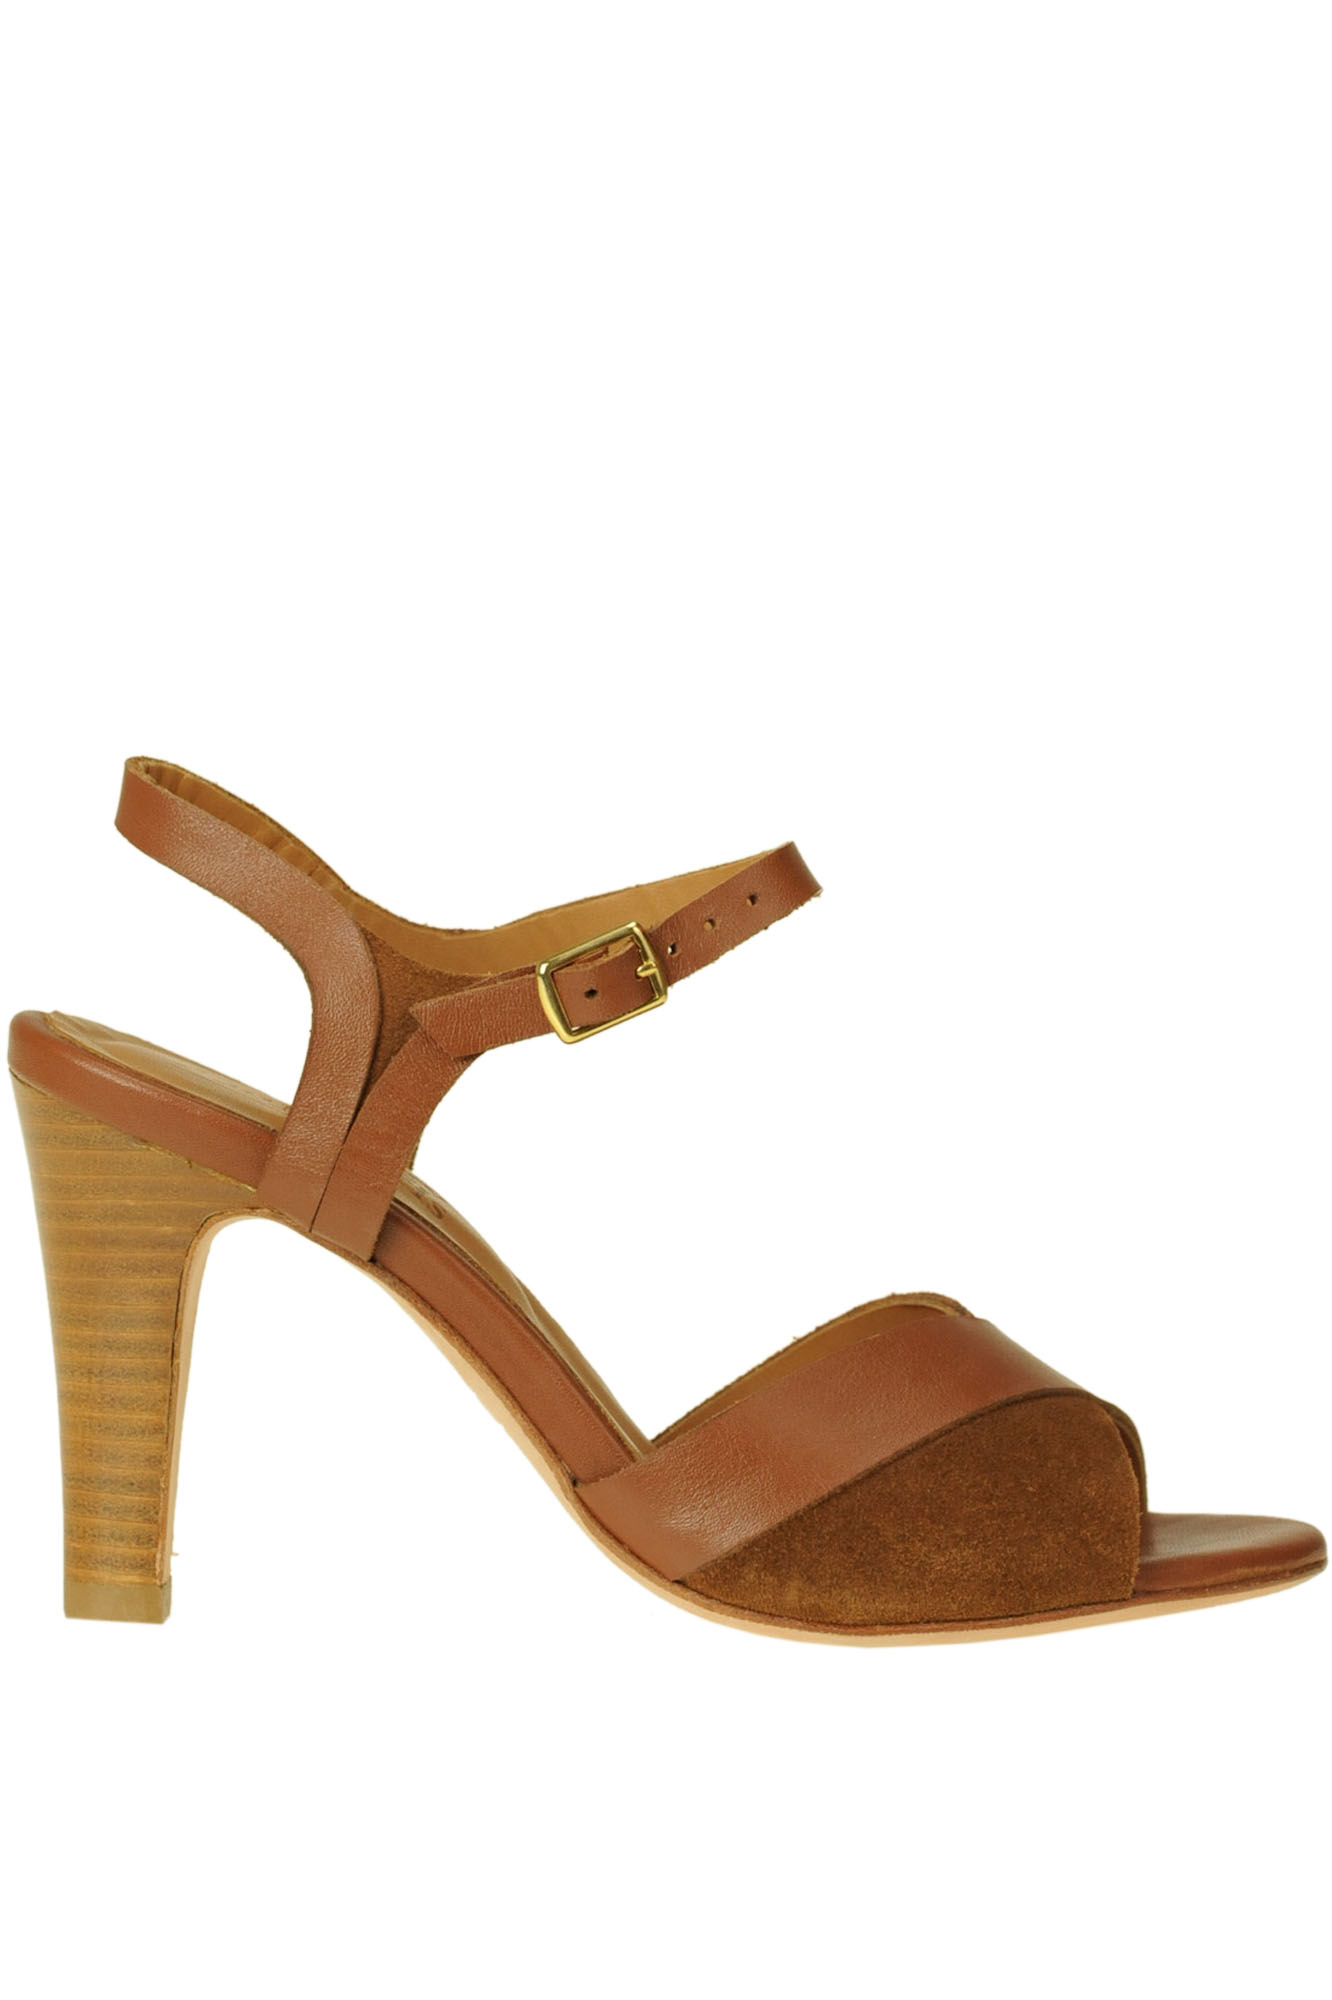 ANTHOLOGY PARIS LEATHER AND SUEDE SANDALS